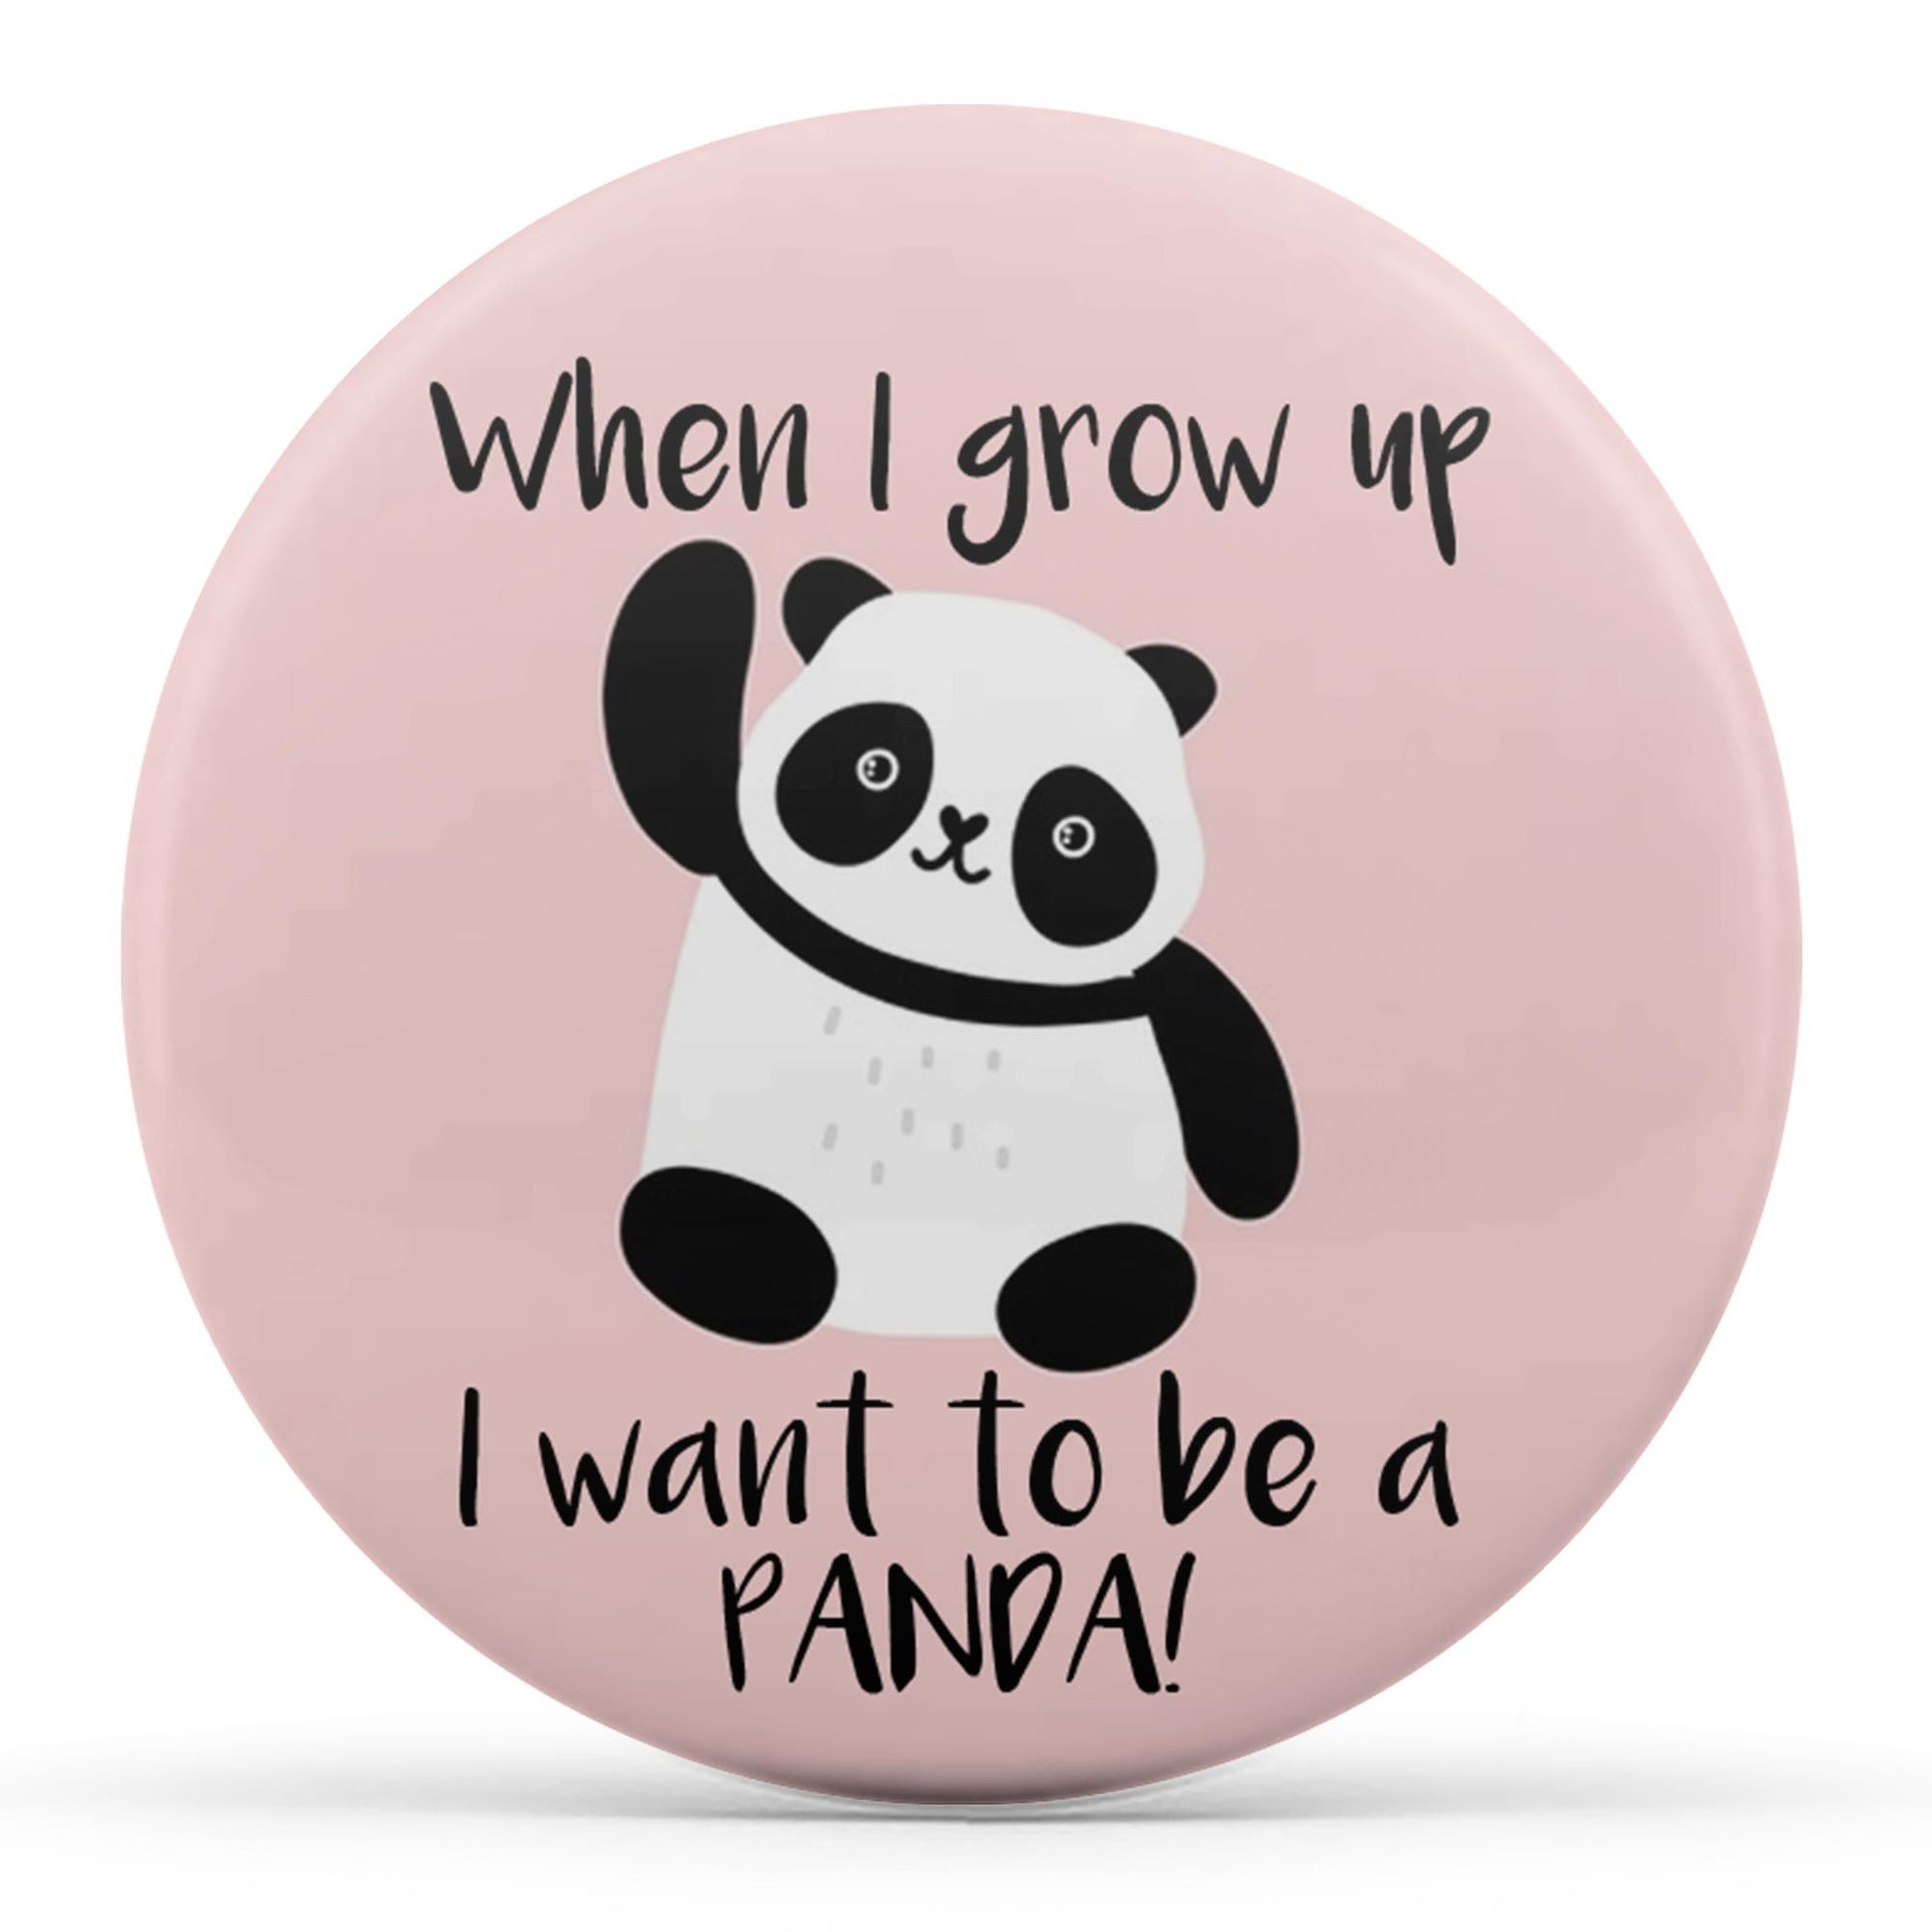 When I Grow Up, I Want To Be A Panda Image